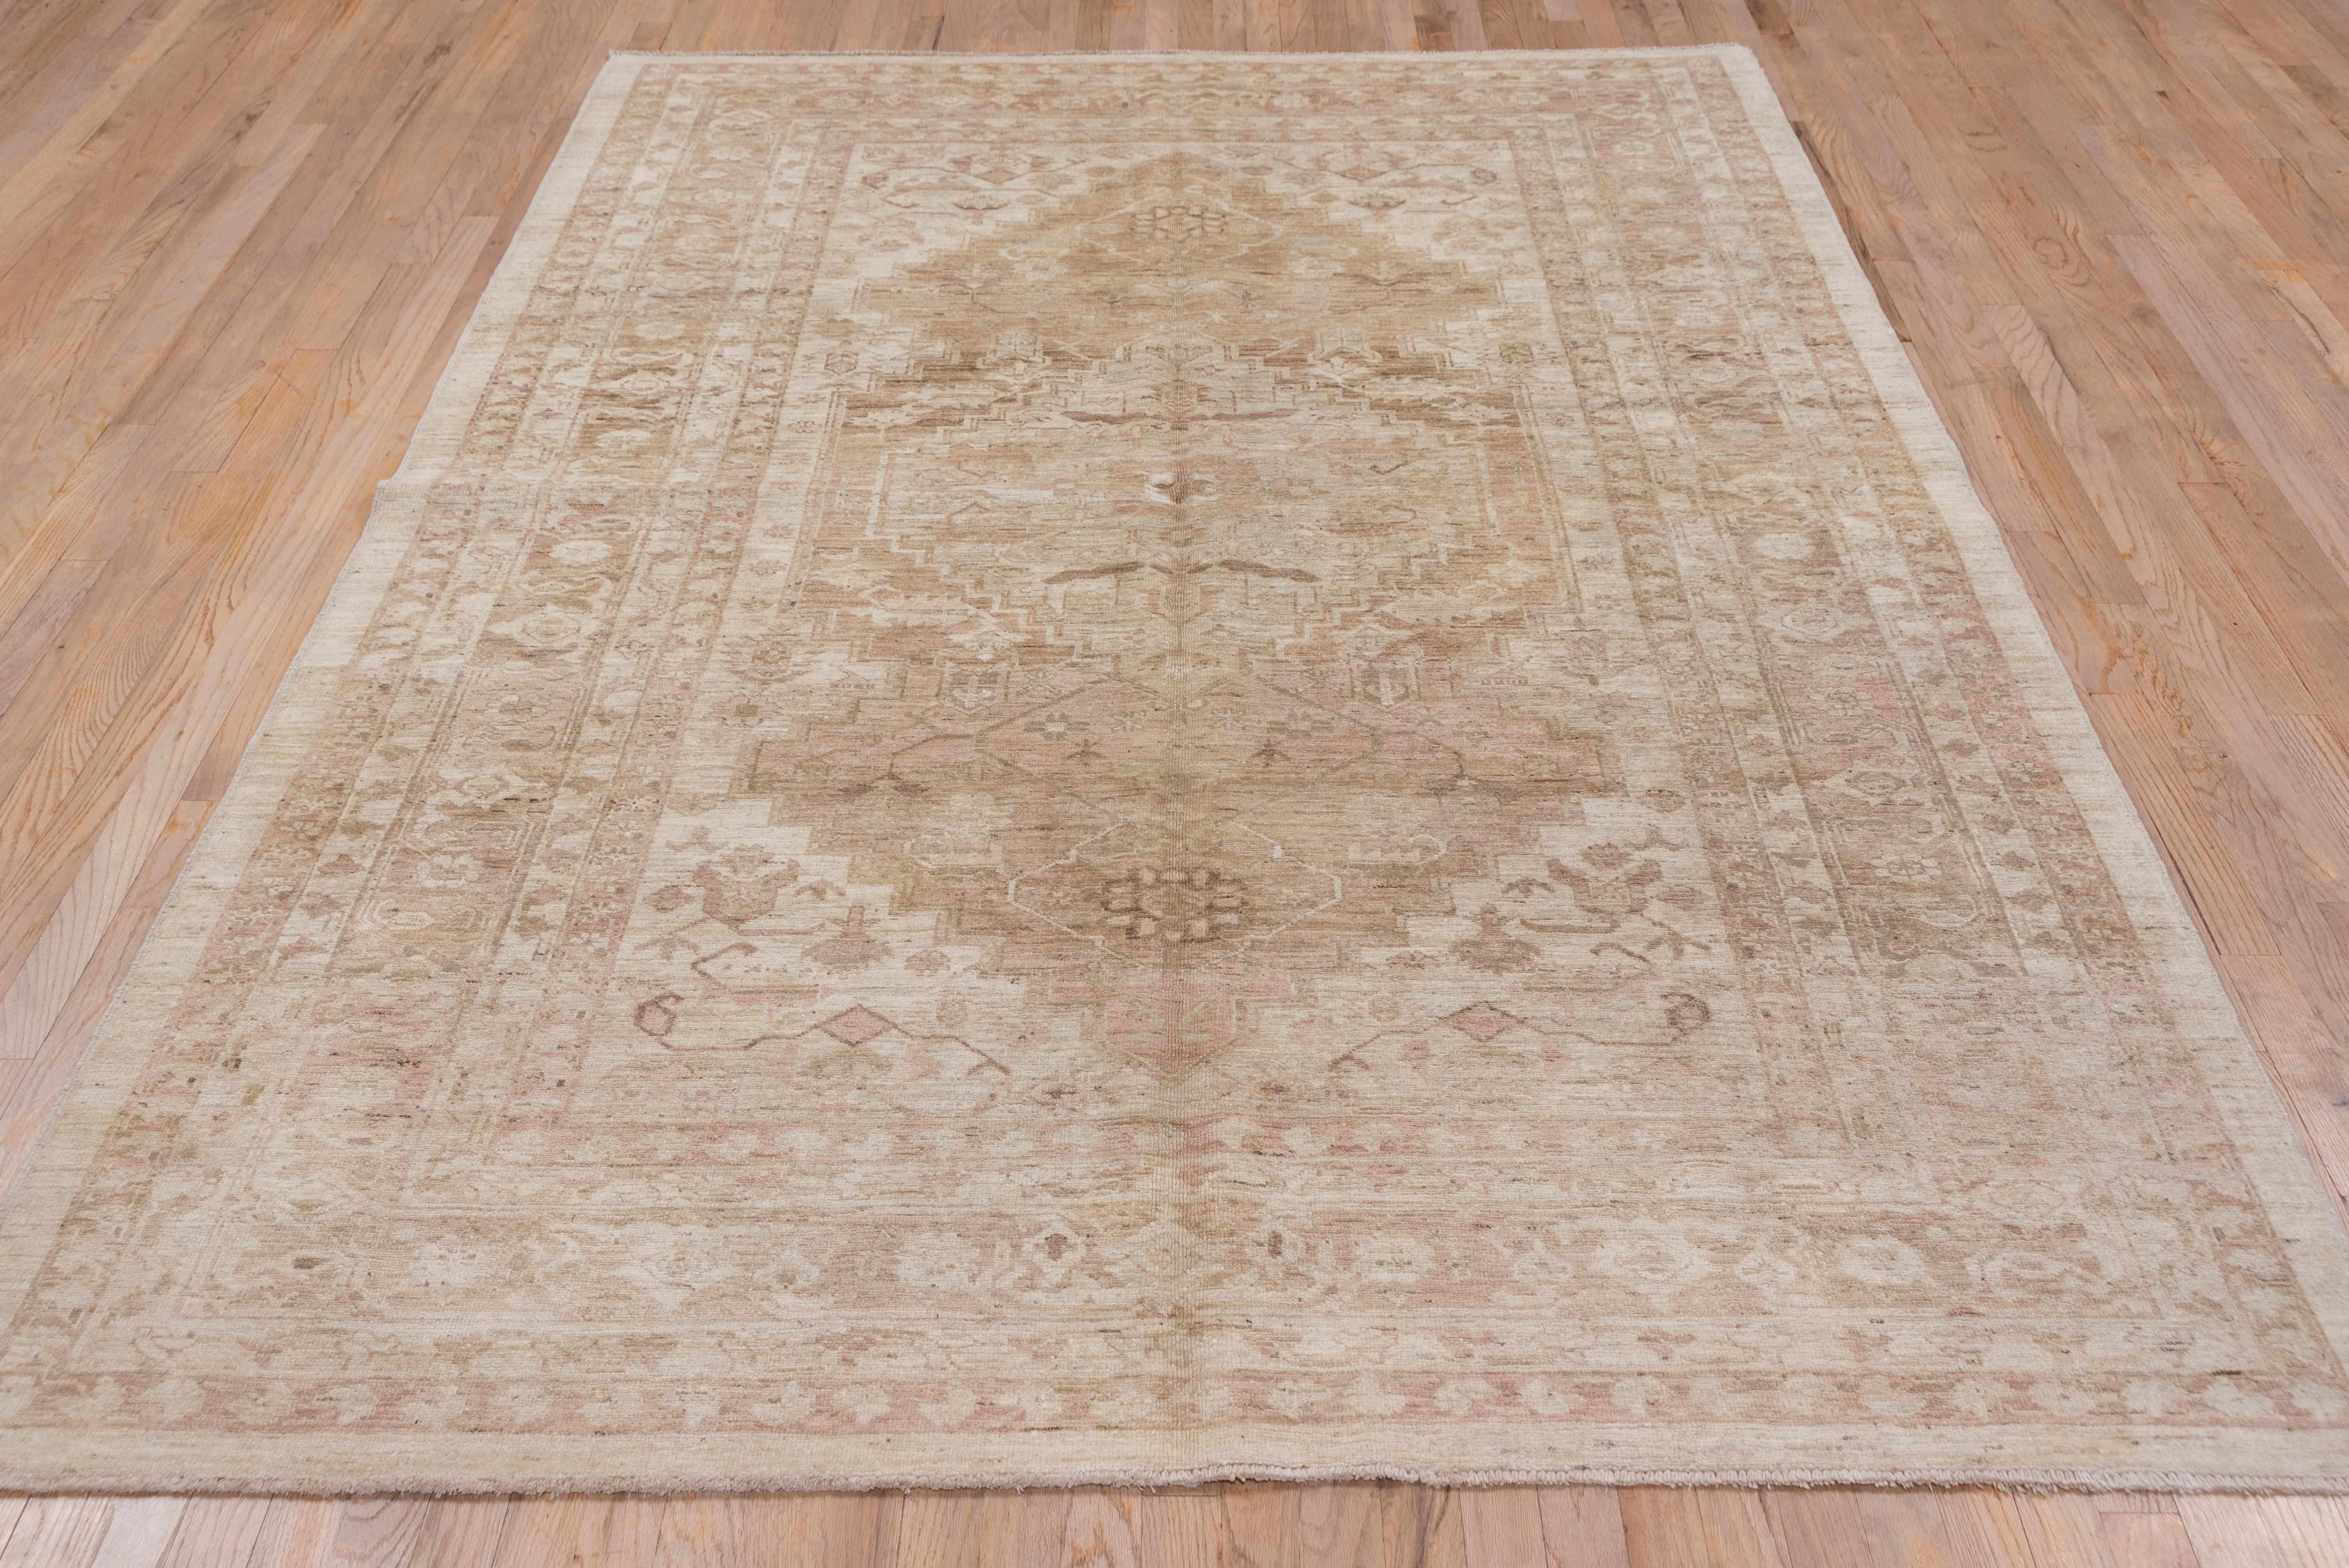 Neutral Persian Heriz Carpet In Excellent Condition For Sale In New York, NY